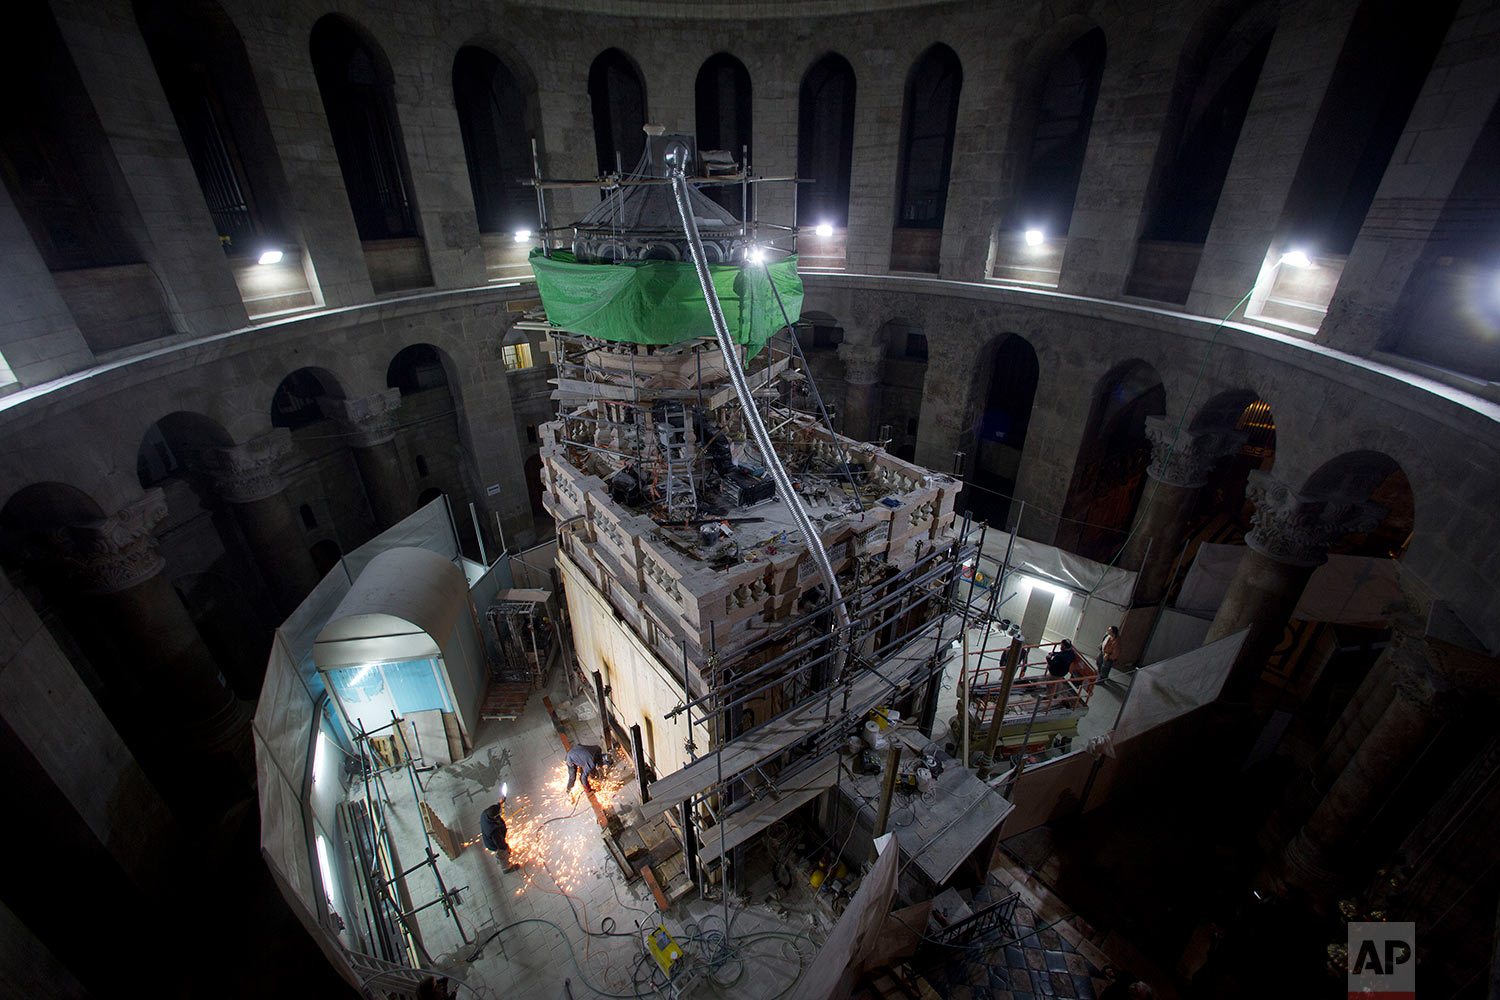  Members of the conservation team remove steel girders supporting the Edicule during restoration work, at the Church of the Holy Sepulchre in Jerusalem's Old City Wednesday, Feb. 22, 2017. (AP Photo/Oded Balilty) 